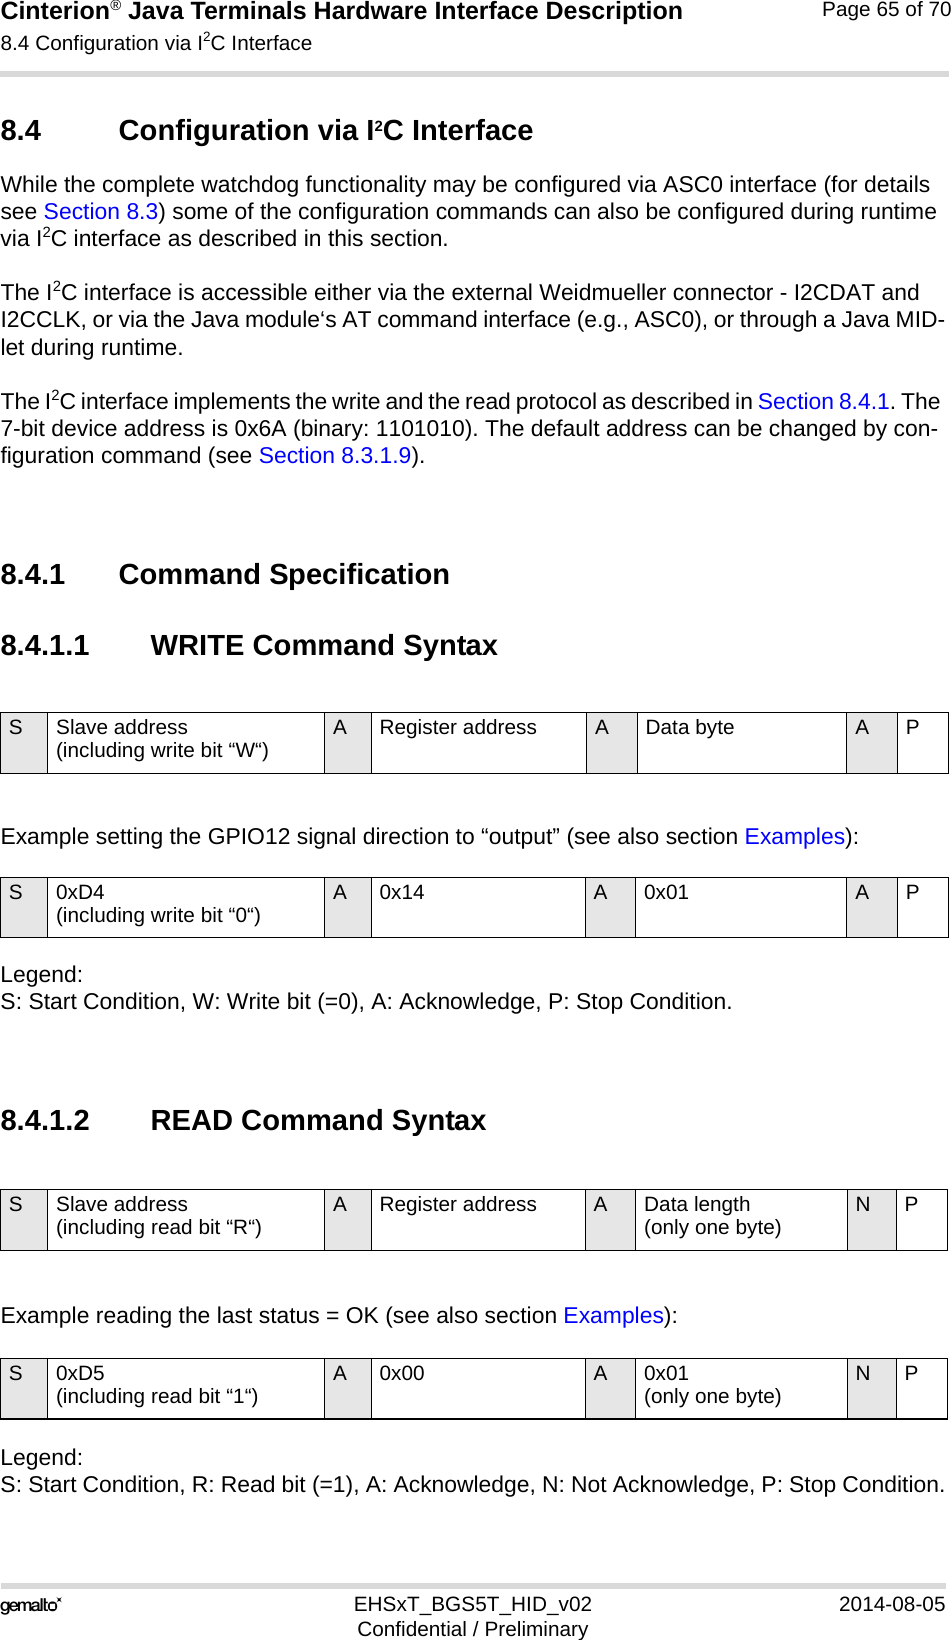 Cinterion® Java Terminals Hardware Interface Description8.4 Configuration via I2C Interface69EHSxT_BGS5T_HID_v02 2014-08-05Confidential / PreliminaryPage 65 of 708.4 Configuration via I2C InterfaceWhile the complete watchdog functionality may be configured via ASC0 interface (for details see Section 8.3) some of the configuration commands can also be configured during runtime via I2C interface as described in this section.The I2C interface is accessible either via the external Weidmueller connector - I2CDAT and I2CCLK, or via the Java module‘s AT command interface (e.g., ASC0), or through a Java MID-let during runtime.The I2C interface implements the write and the read protocol as described in Section 8.4.1. The 7-bit device address is 0x6A (binary: 1101010). The default address can be changed by con-figuration command (see Section 8.3.1.9).8.4.1 Command Specification8.4.1.1 WRITE Command SyntaxExample setting the GPIO12 signal direction to “output” (see also section Examples):Legend:S: Start Condition, W: Write bit (=0), A: Acknowledge, P: Stop Condition.8.4.1.2 READ Command SyntaxExample reading the last status = OK (see also section Examples):Legend: S: Start Condition, R: Read bit (=1), A: Acknowledge, N: Not Acknowledge, P: Stop Condition.S Slave address (including write bit “W“) A Register address A Data byte APS0xD4 (including write bit “0“) A 0x14 A 0x01 APS Slave address (including read bit “R“) A Register address A Data length (only one byte) NPS 0xD5(including read bit “1“) A 0x00 A 0x01(only one byte) NP